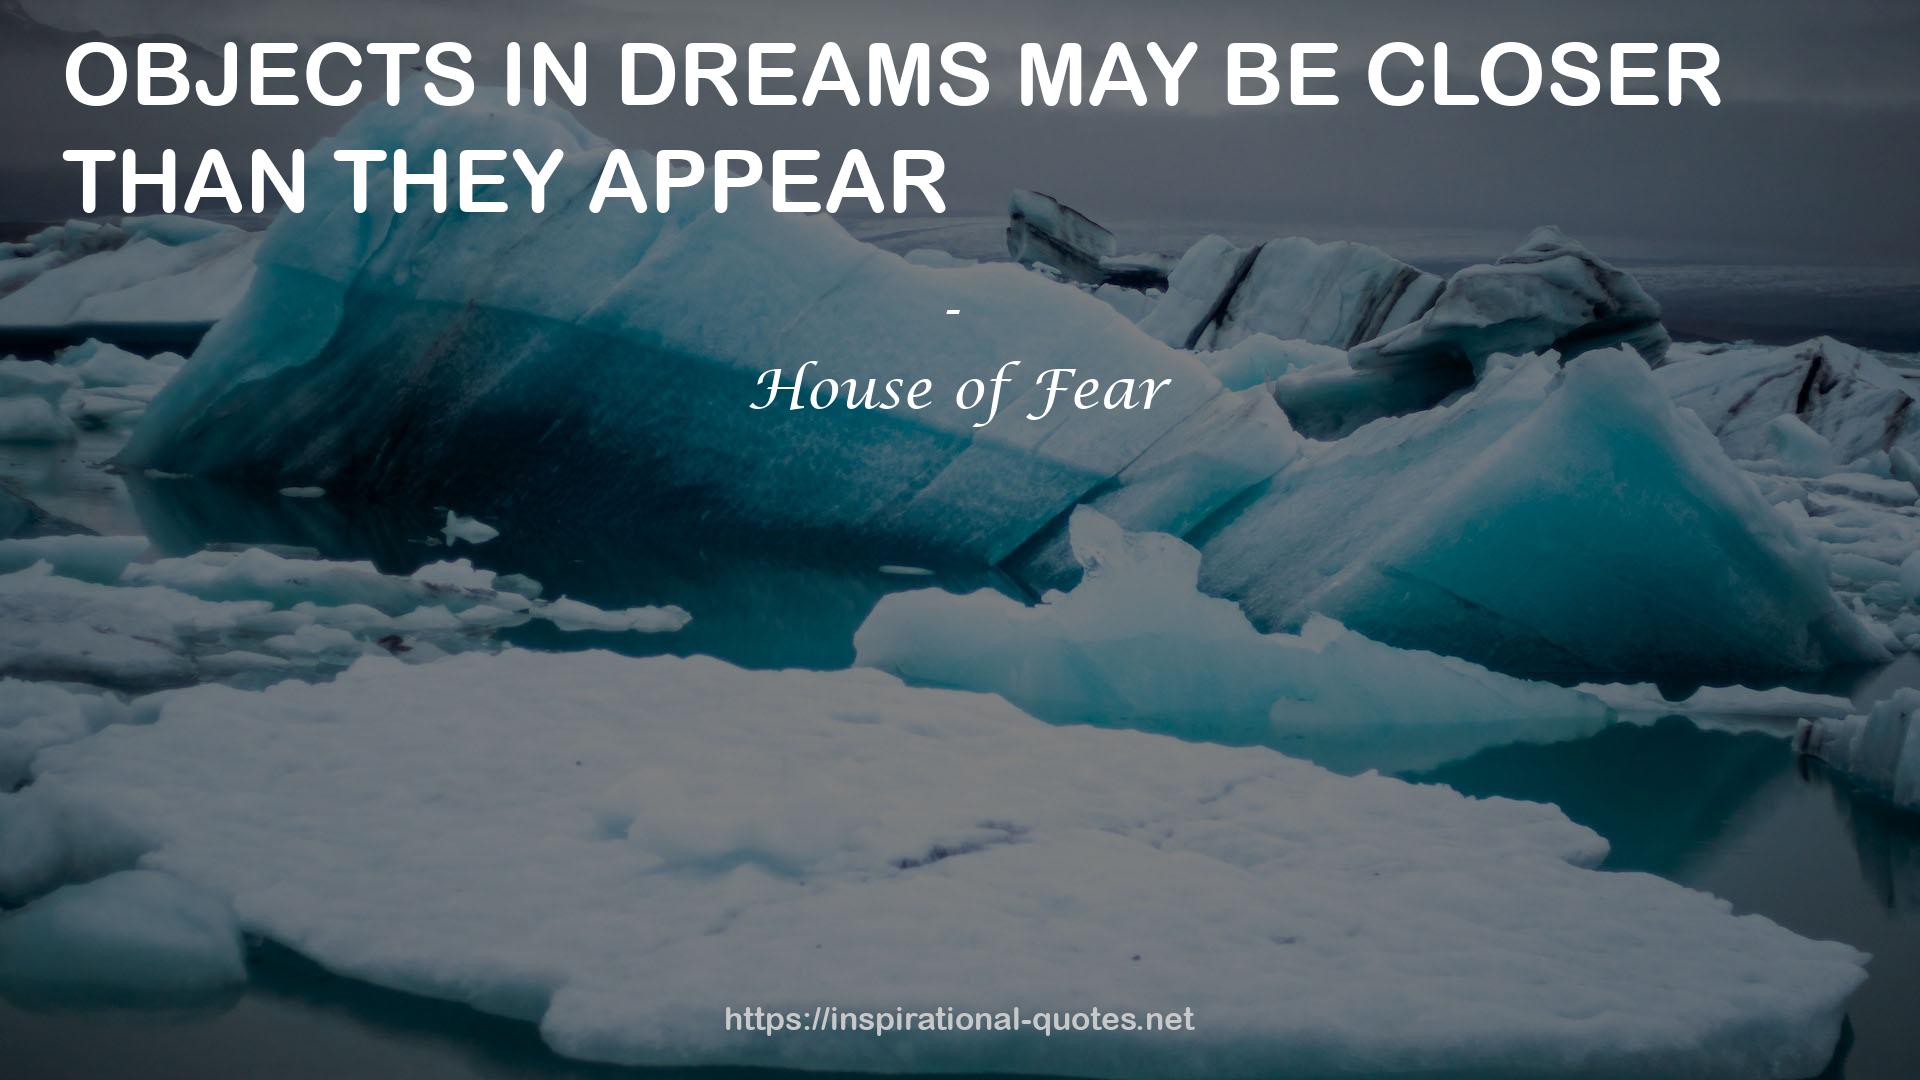 House of Fear QUOTES